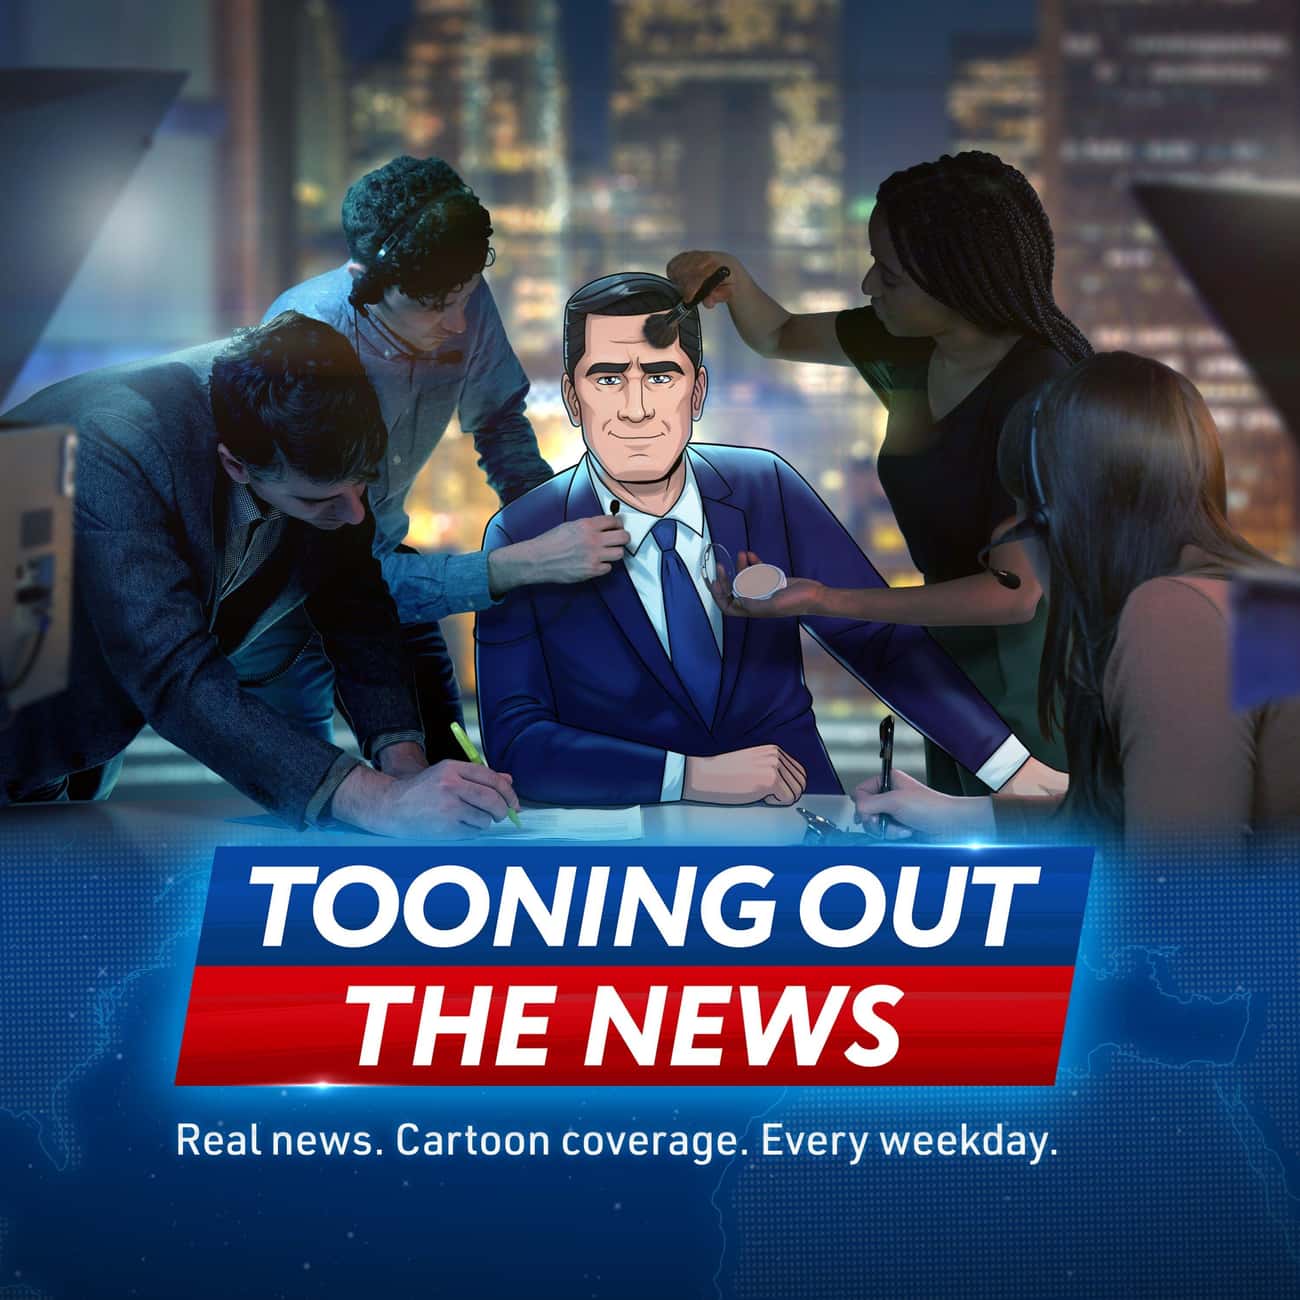 Tooning Out the News